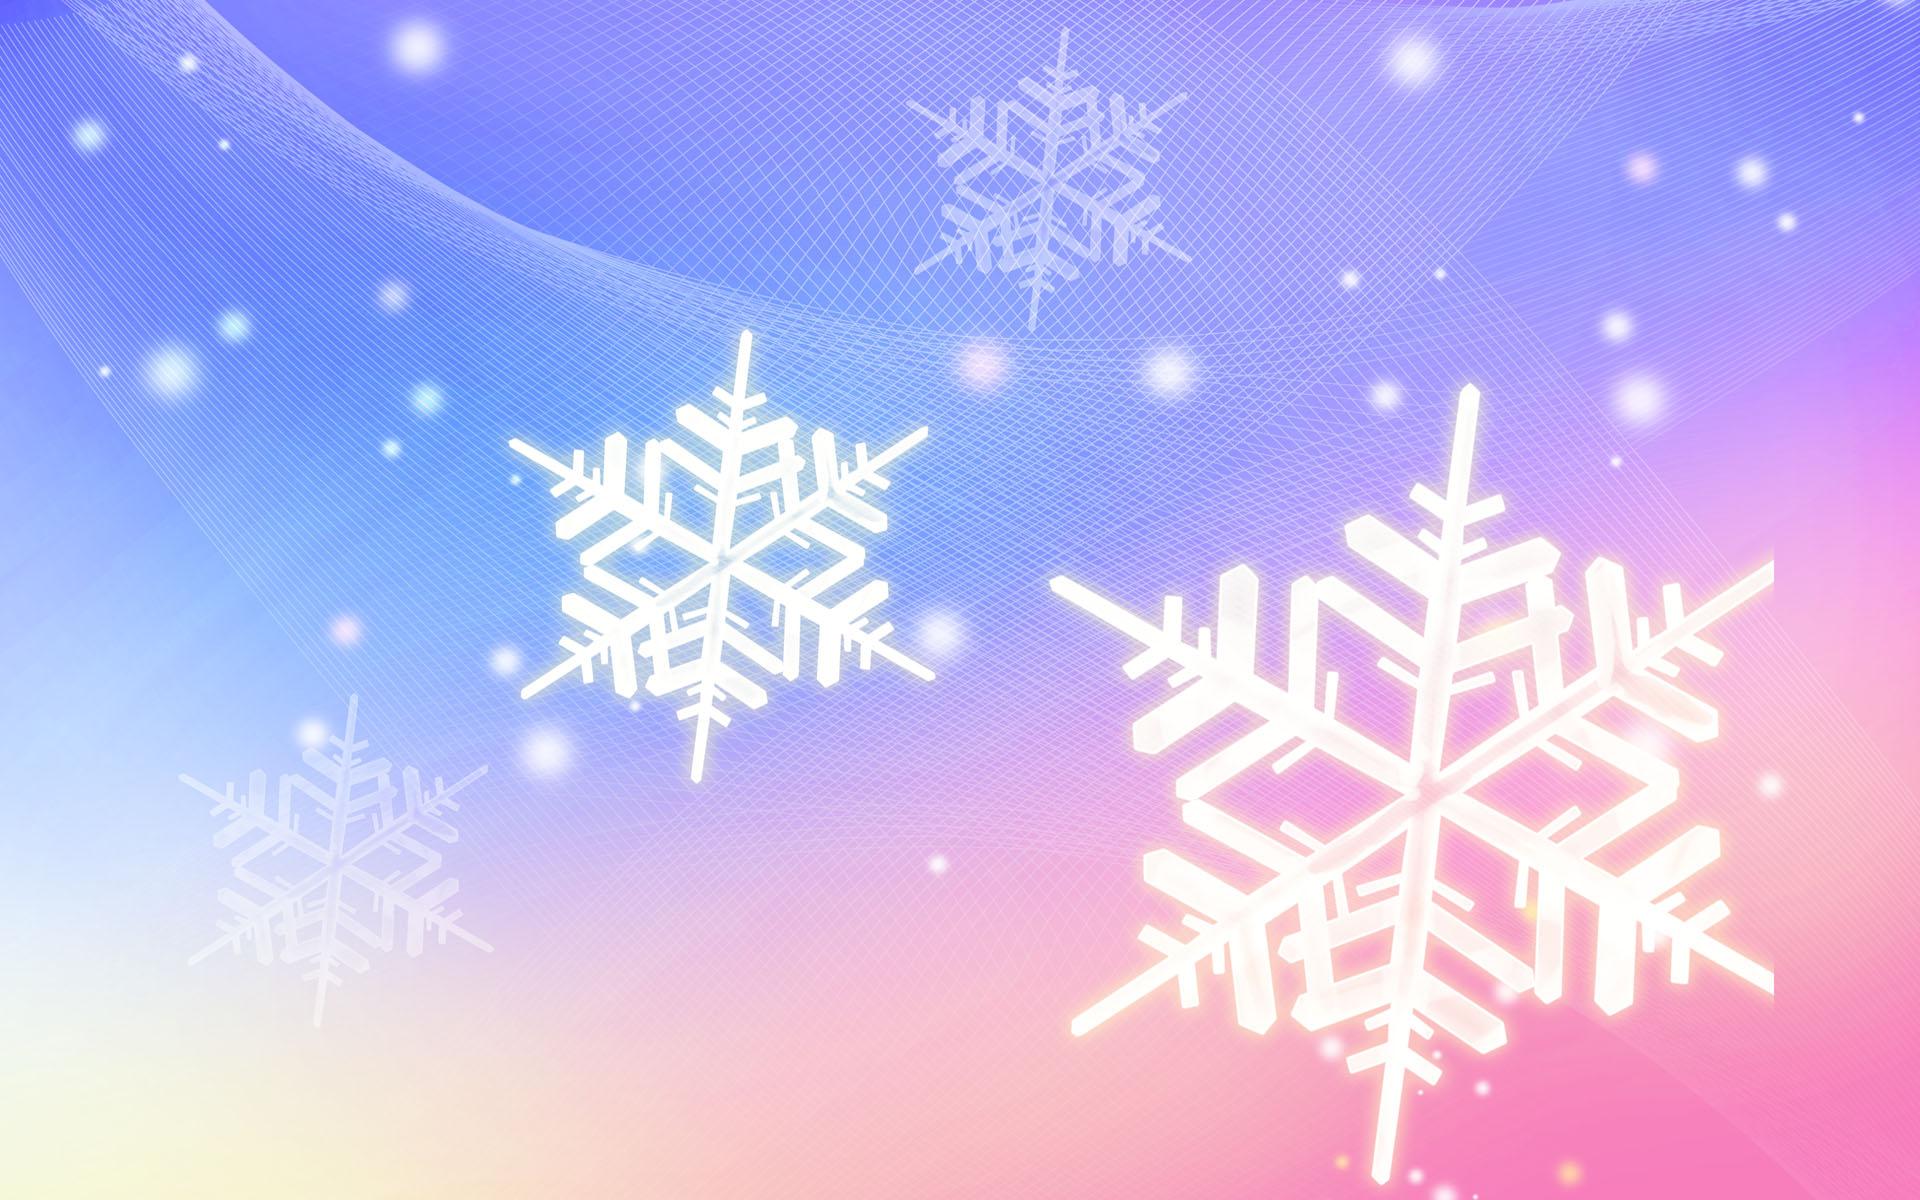 Snowflake Backgrounds Download Free Pixelstalk
pink - Hd Backgrounds Of Snowflakes - HD Wallpaper 